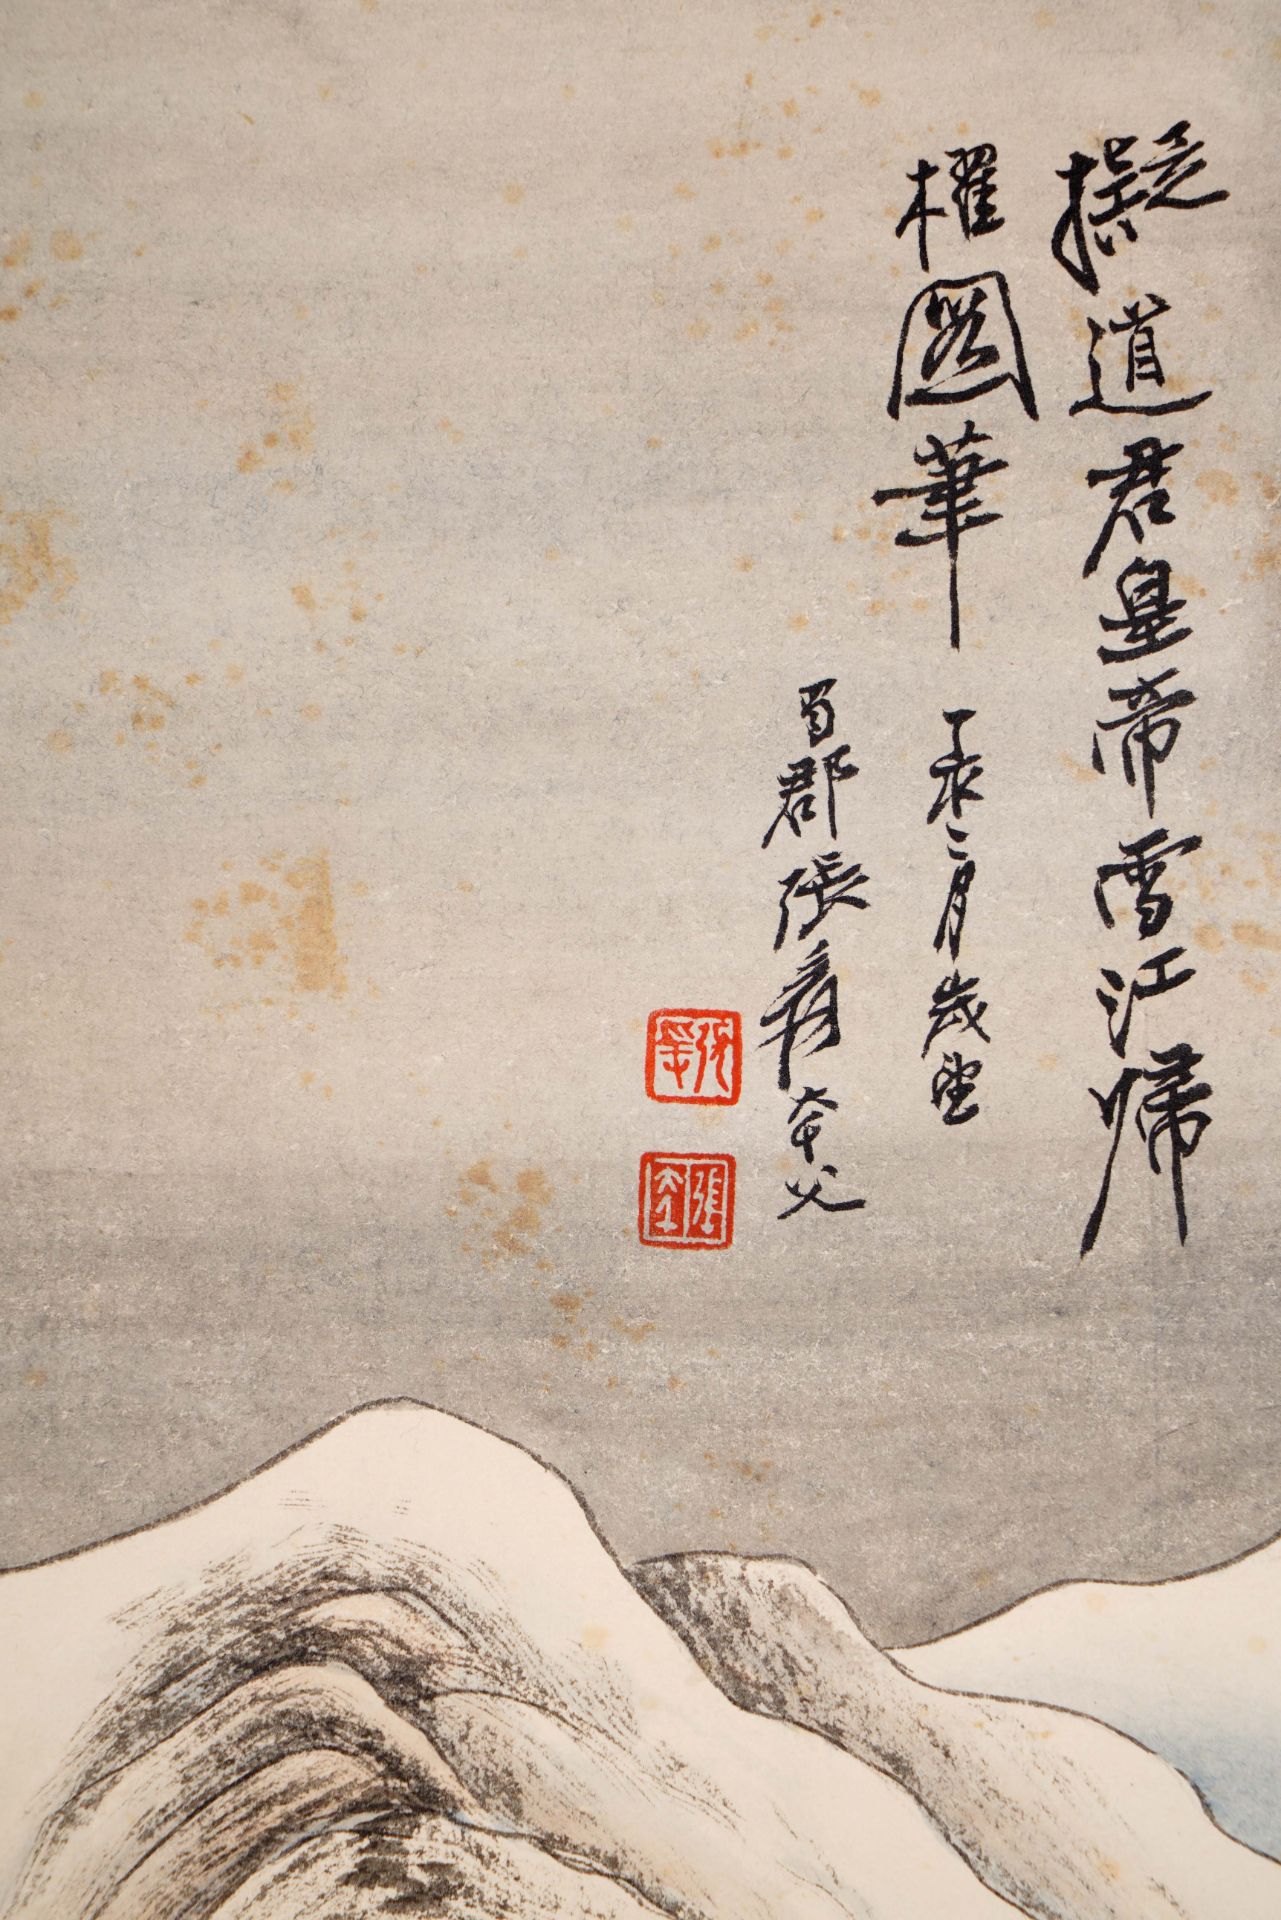 A Chinese Scroll Painting By Zhang Daqian - Image 2 of 11